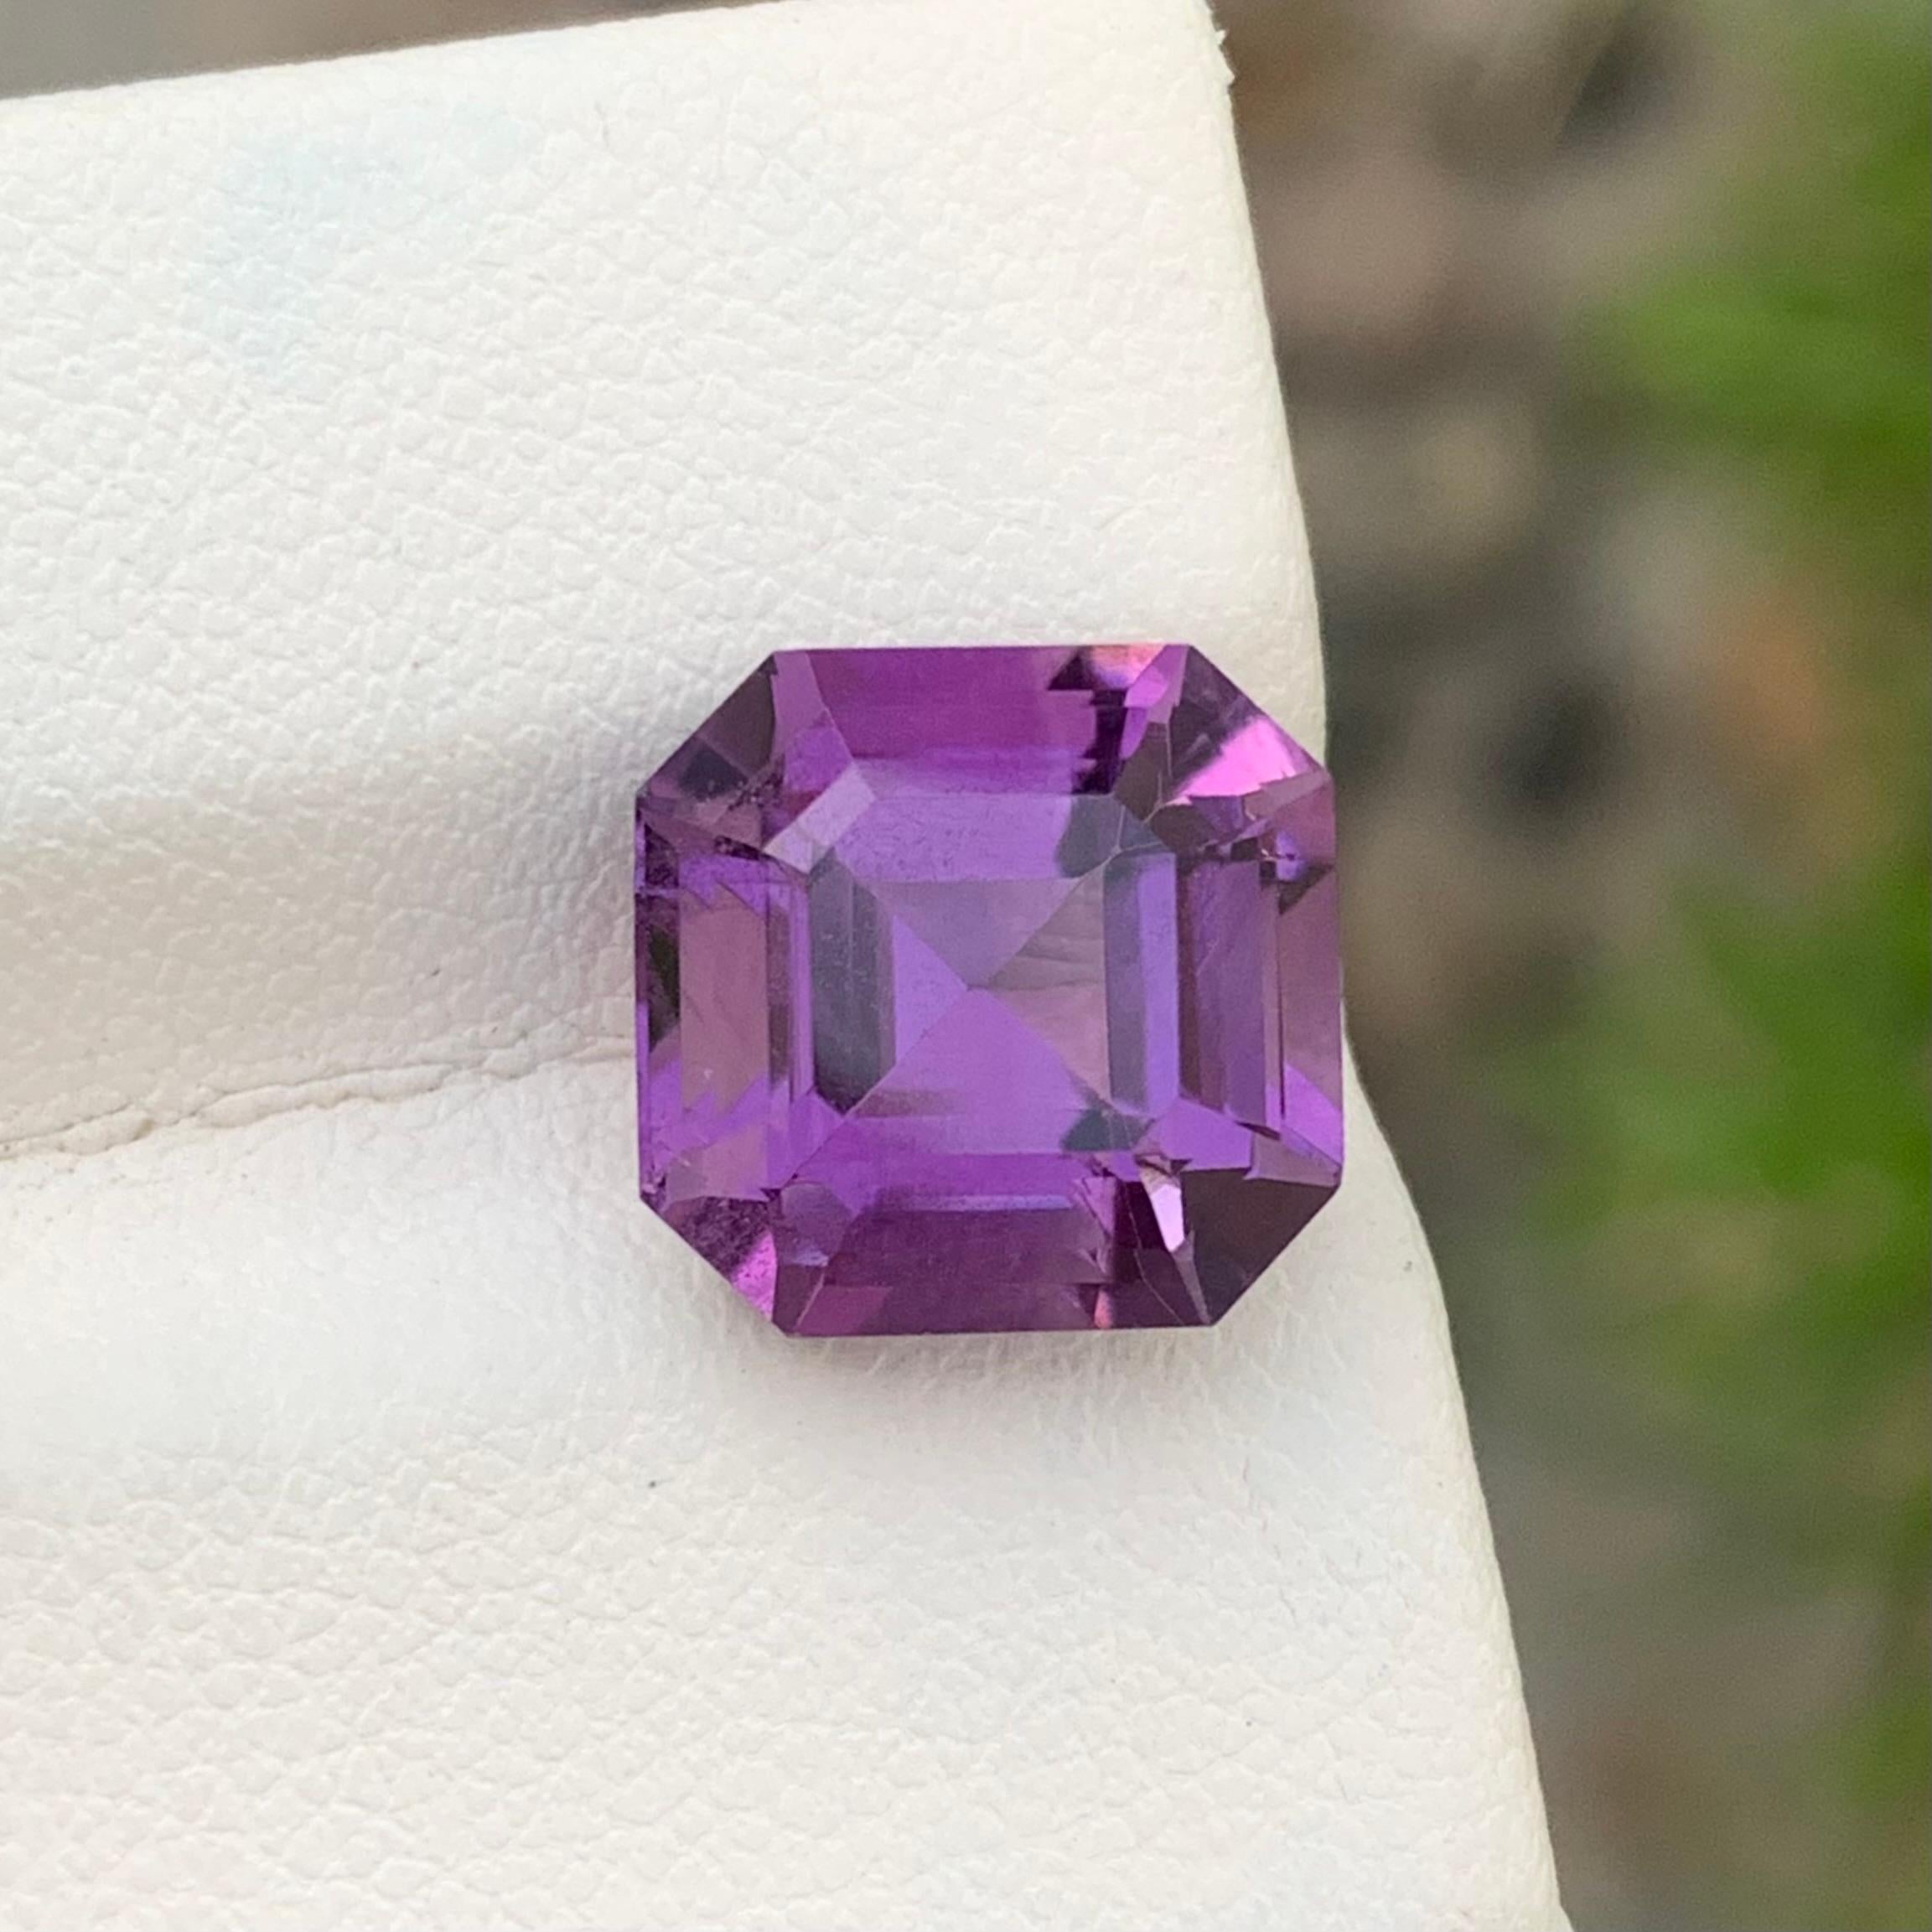 Loose Amethyst 
Weight: 6.05 Carats 
Dimension: 10.9x10.6x8.1 Mm
Origin: Brazil
Shape: Asscher Cut
Color: Purple
Treatment: Non
Certificate: On Client Demand
Amethyst is a captivating violet variety of quartz, known for its stunning purple hue. Its